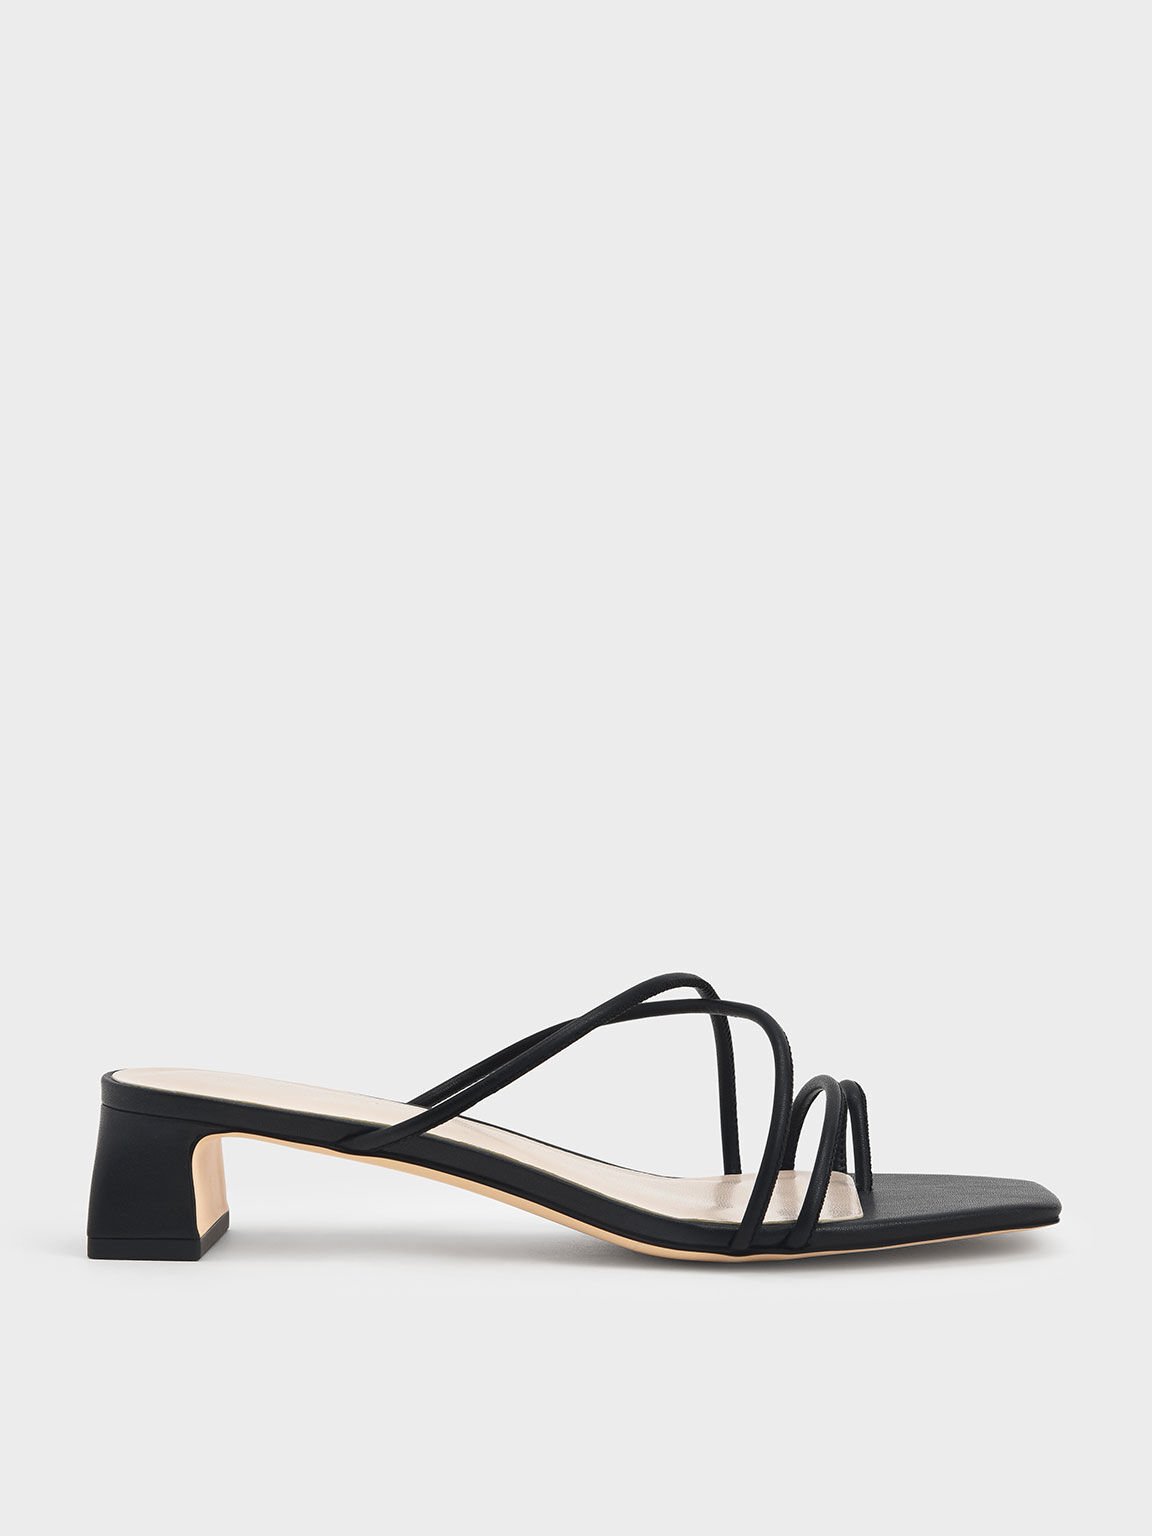 Strappy Toe Ring Sandals - Black